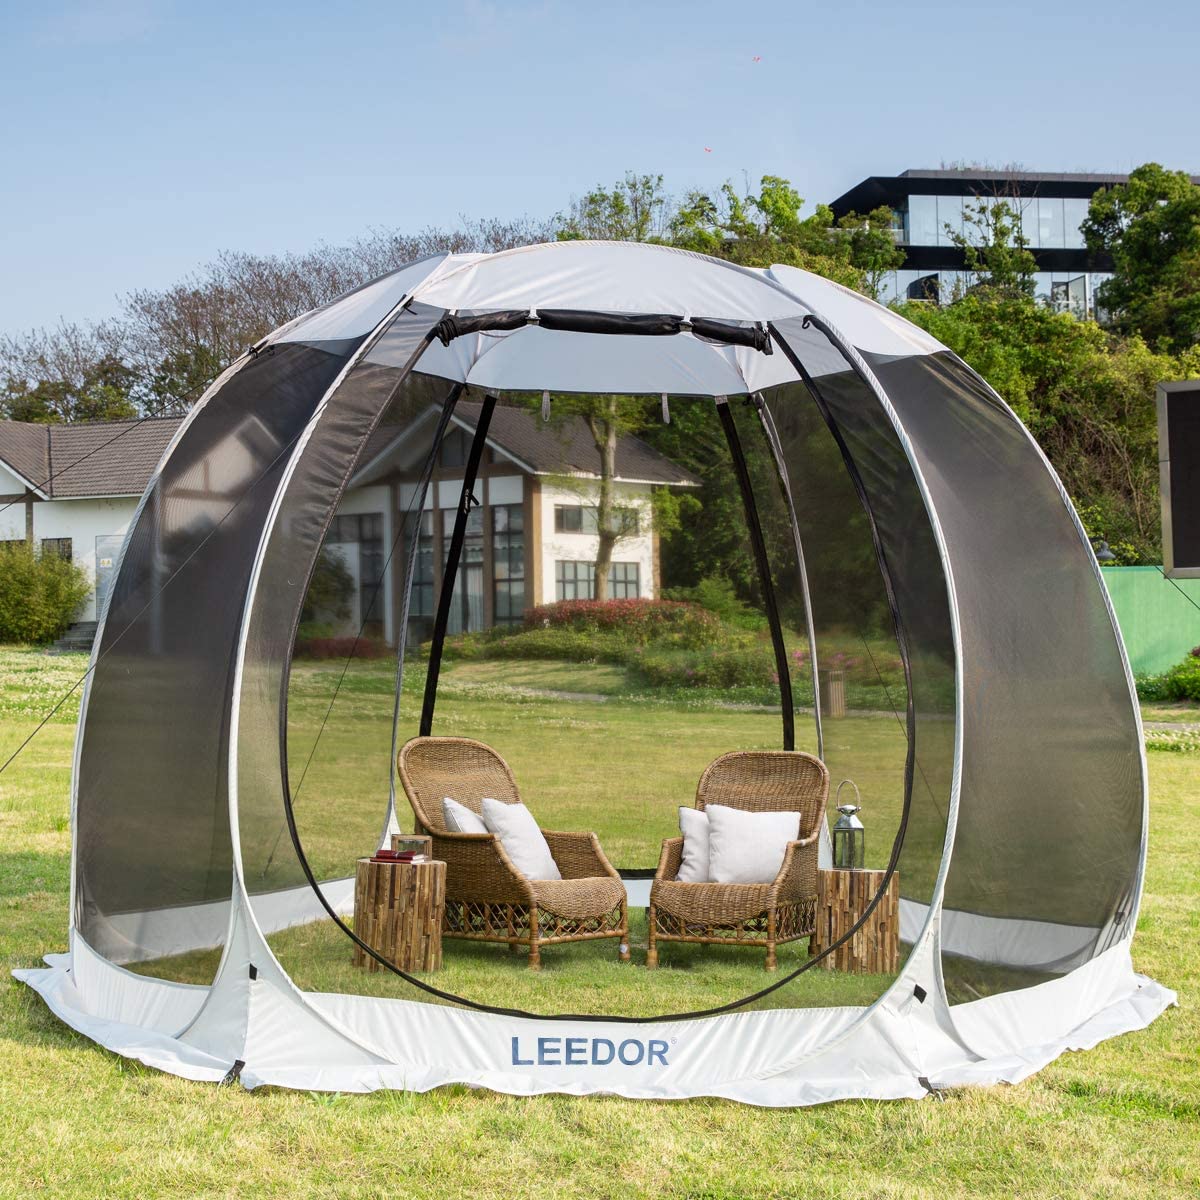 Leedor Gazebos for Patios Screen House Room 4-6 Person Canopy Mosquito Net Camping Tent Dining Pop Up Sun Shade Shelter Mesh Walls Not Waterproof Gray,10'x10' - image 3 of 7